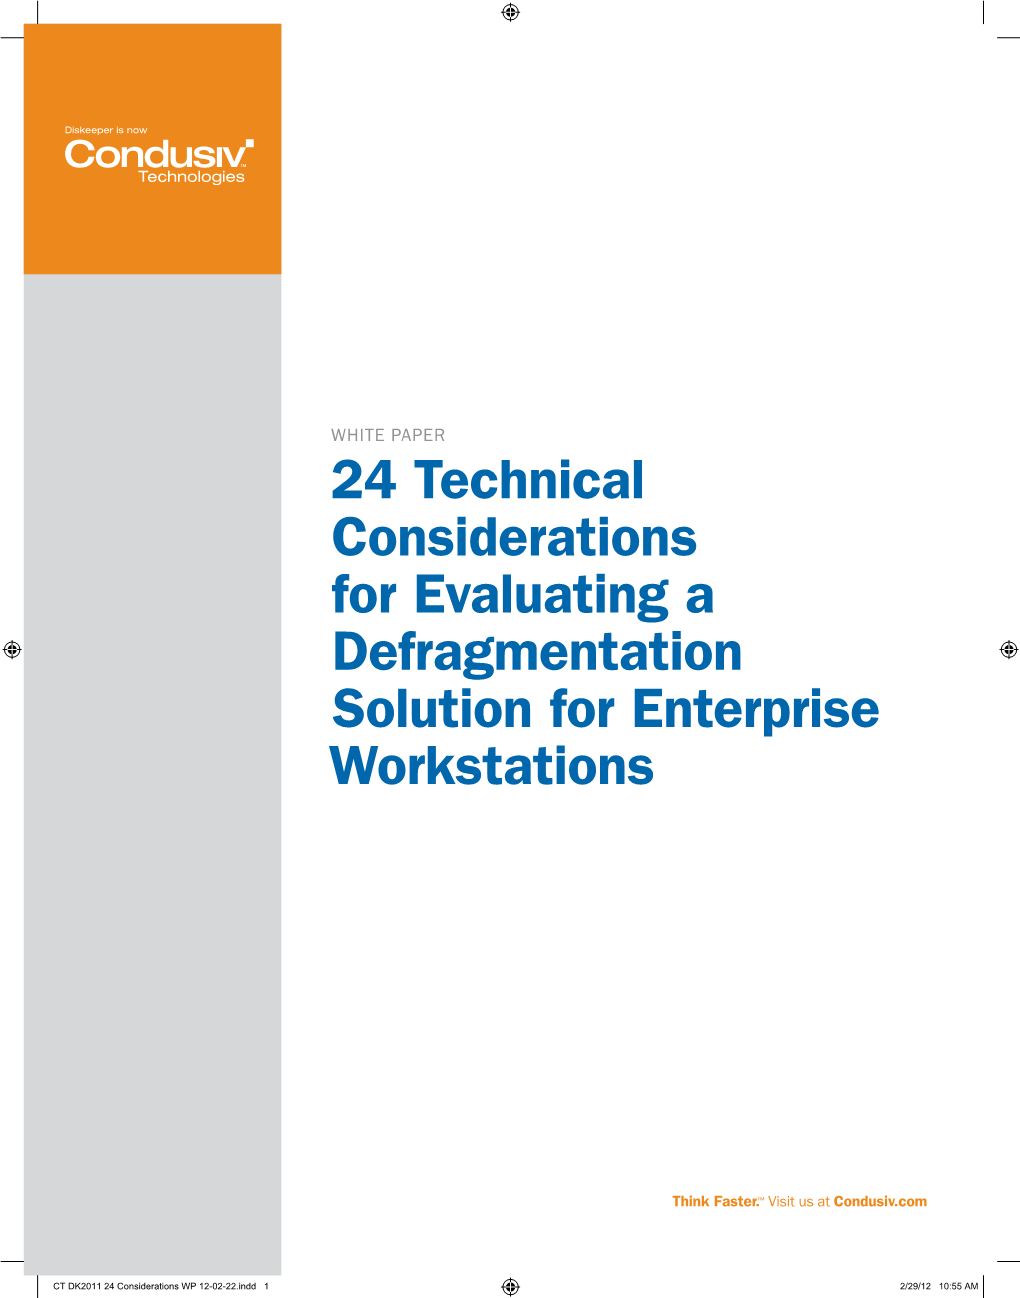 24 Technical Considerations for Evaluating a Defragmentation Solution for Enterprise Workstations